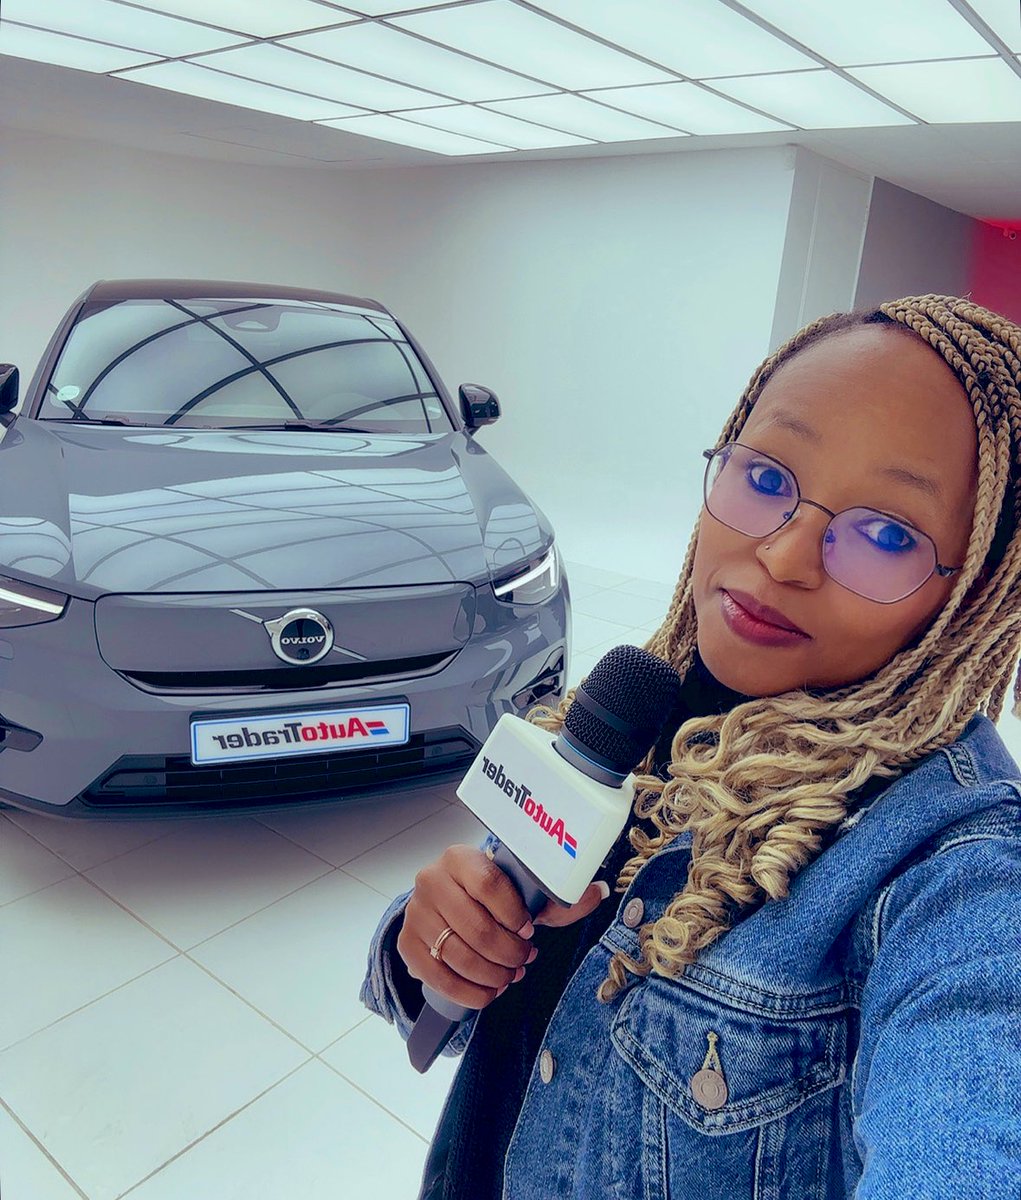 Hanging out with @AutoTraderSA for the day #volvoc40